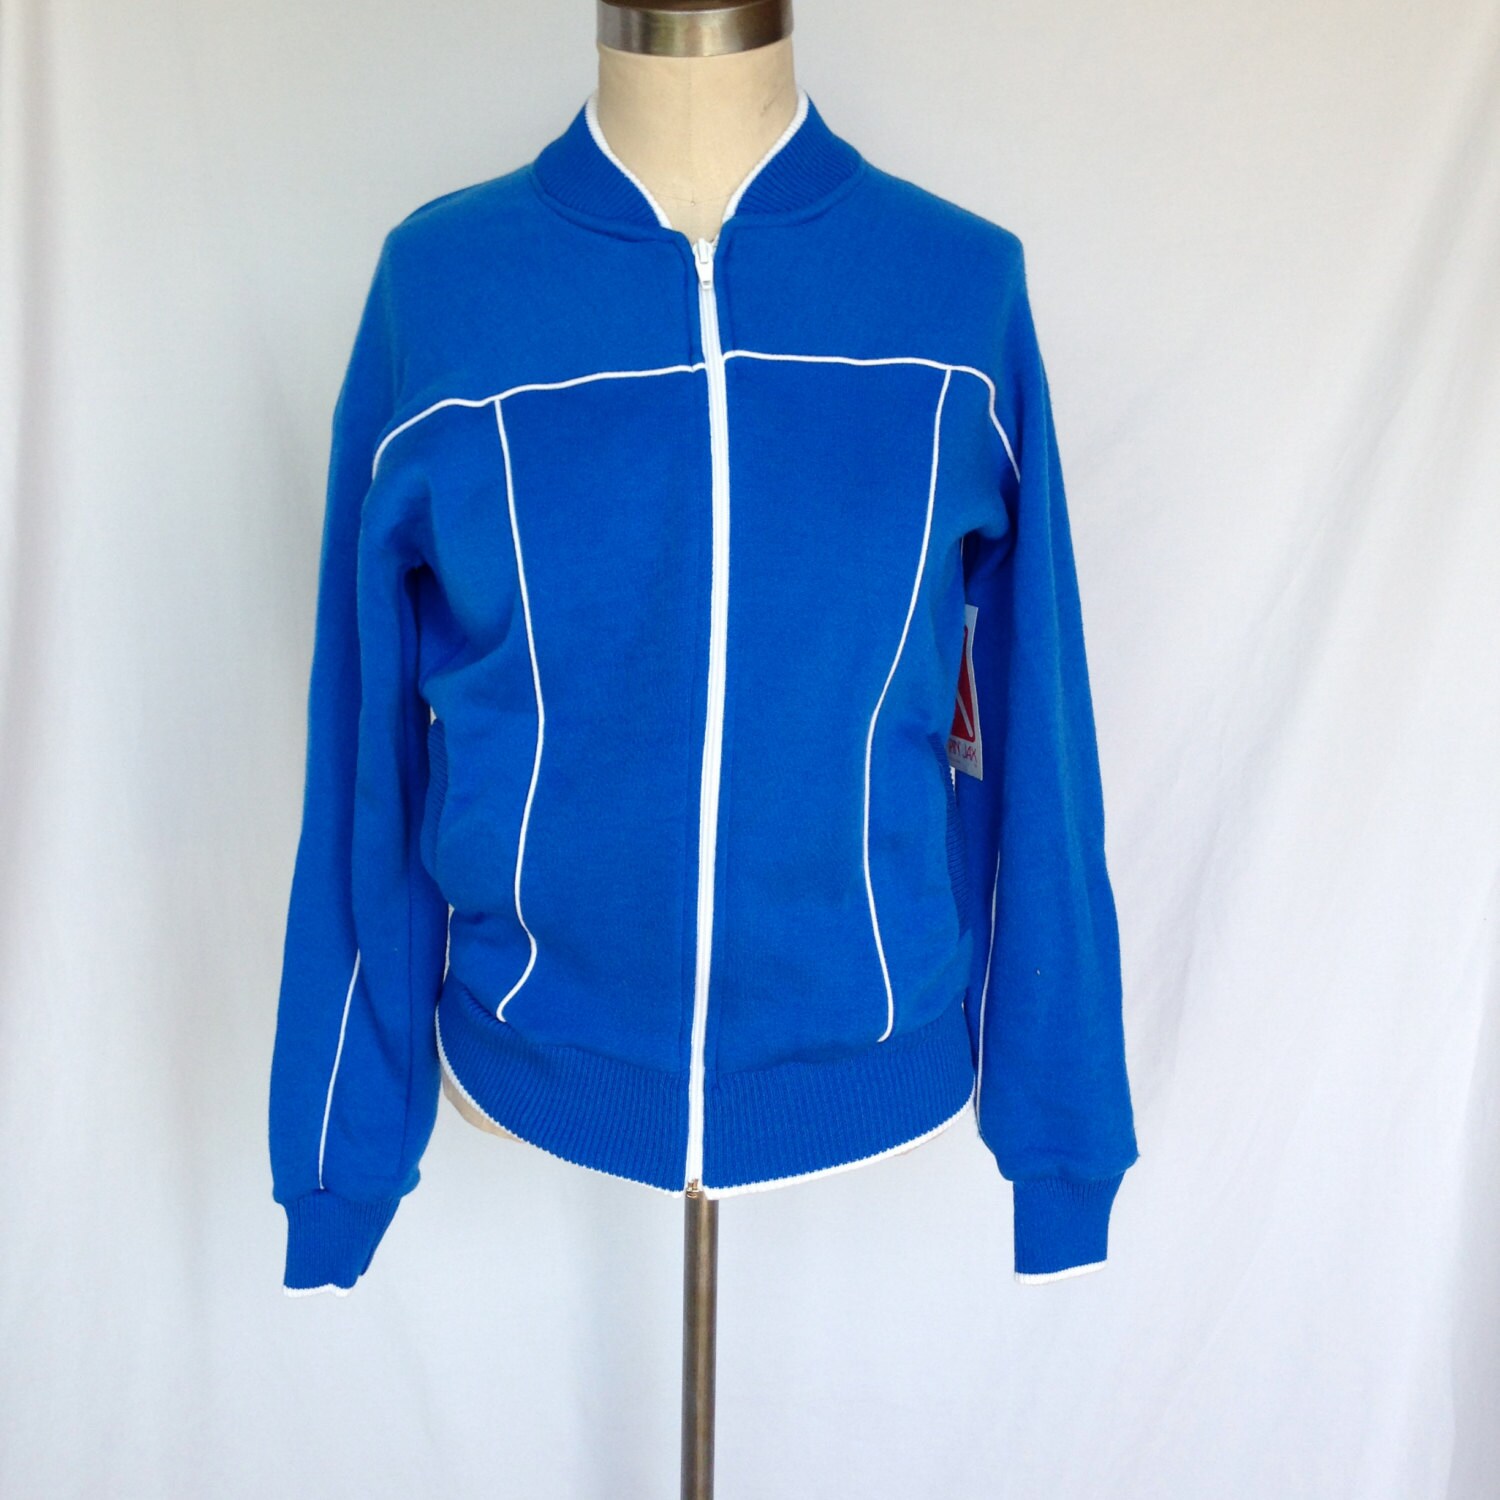 NEW Vintage Blue White Zip up Track Jacket by TheHighwayThrifters